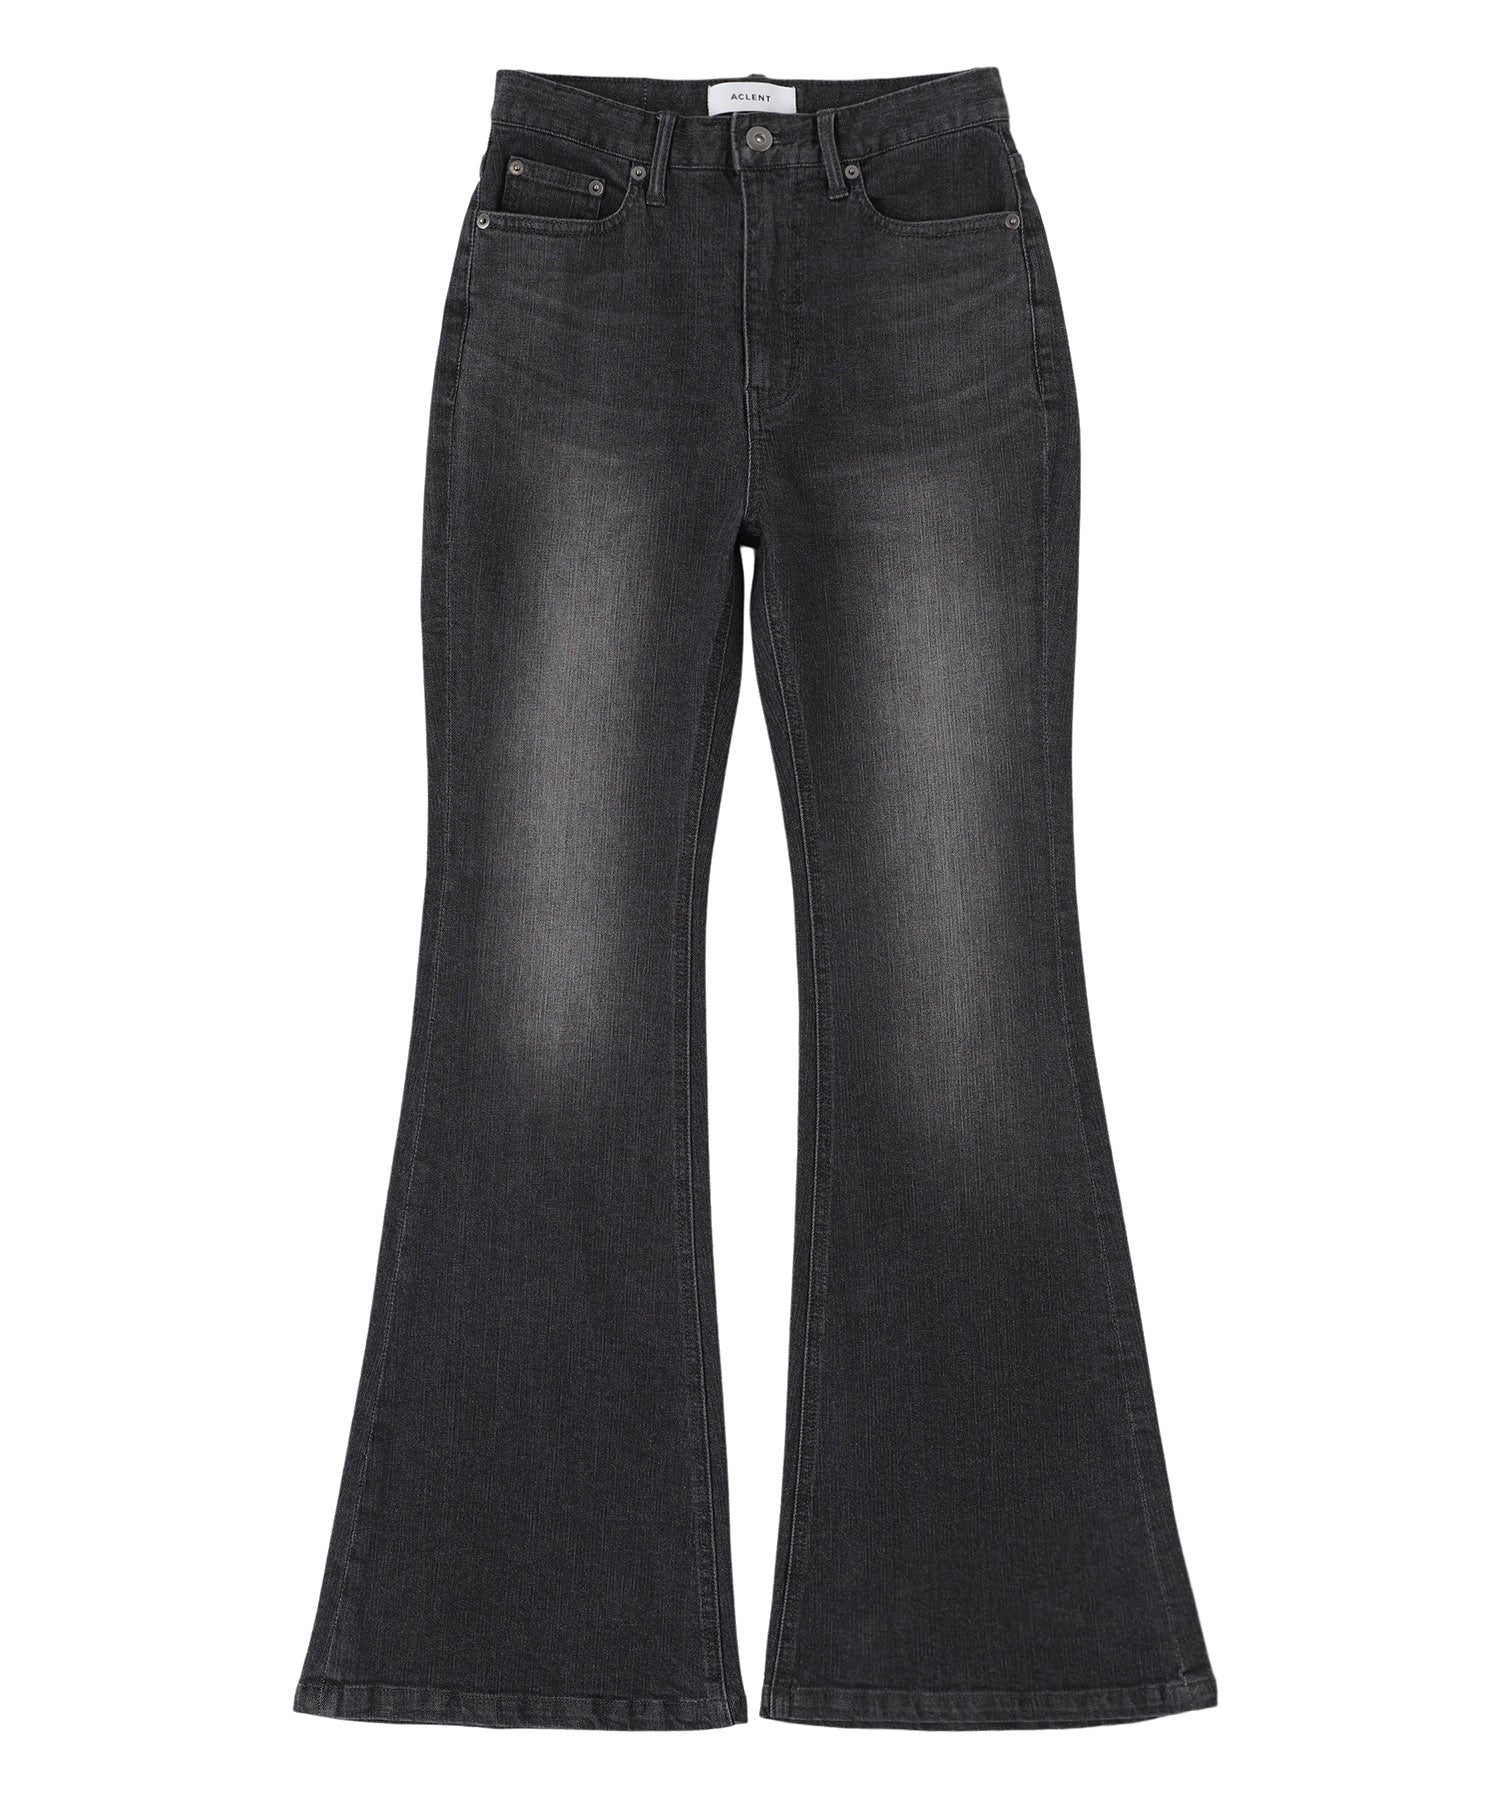 Wash flare stretch jeans